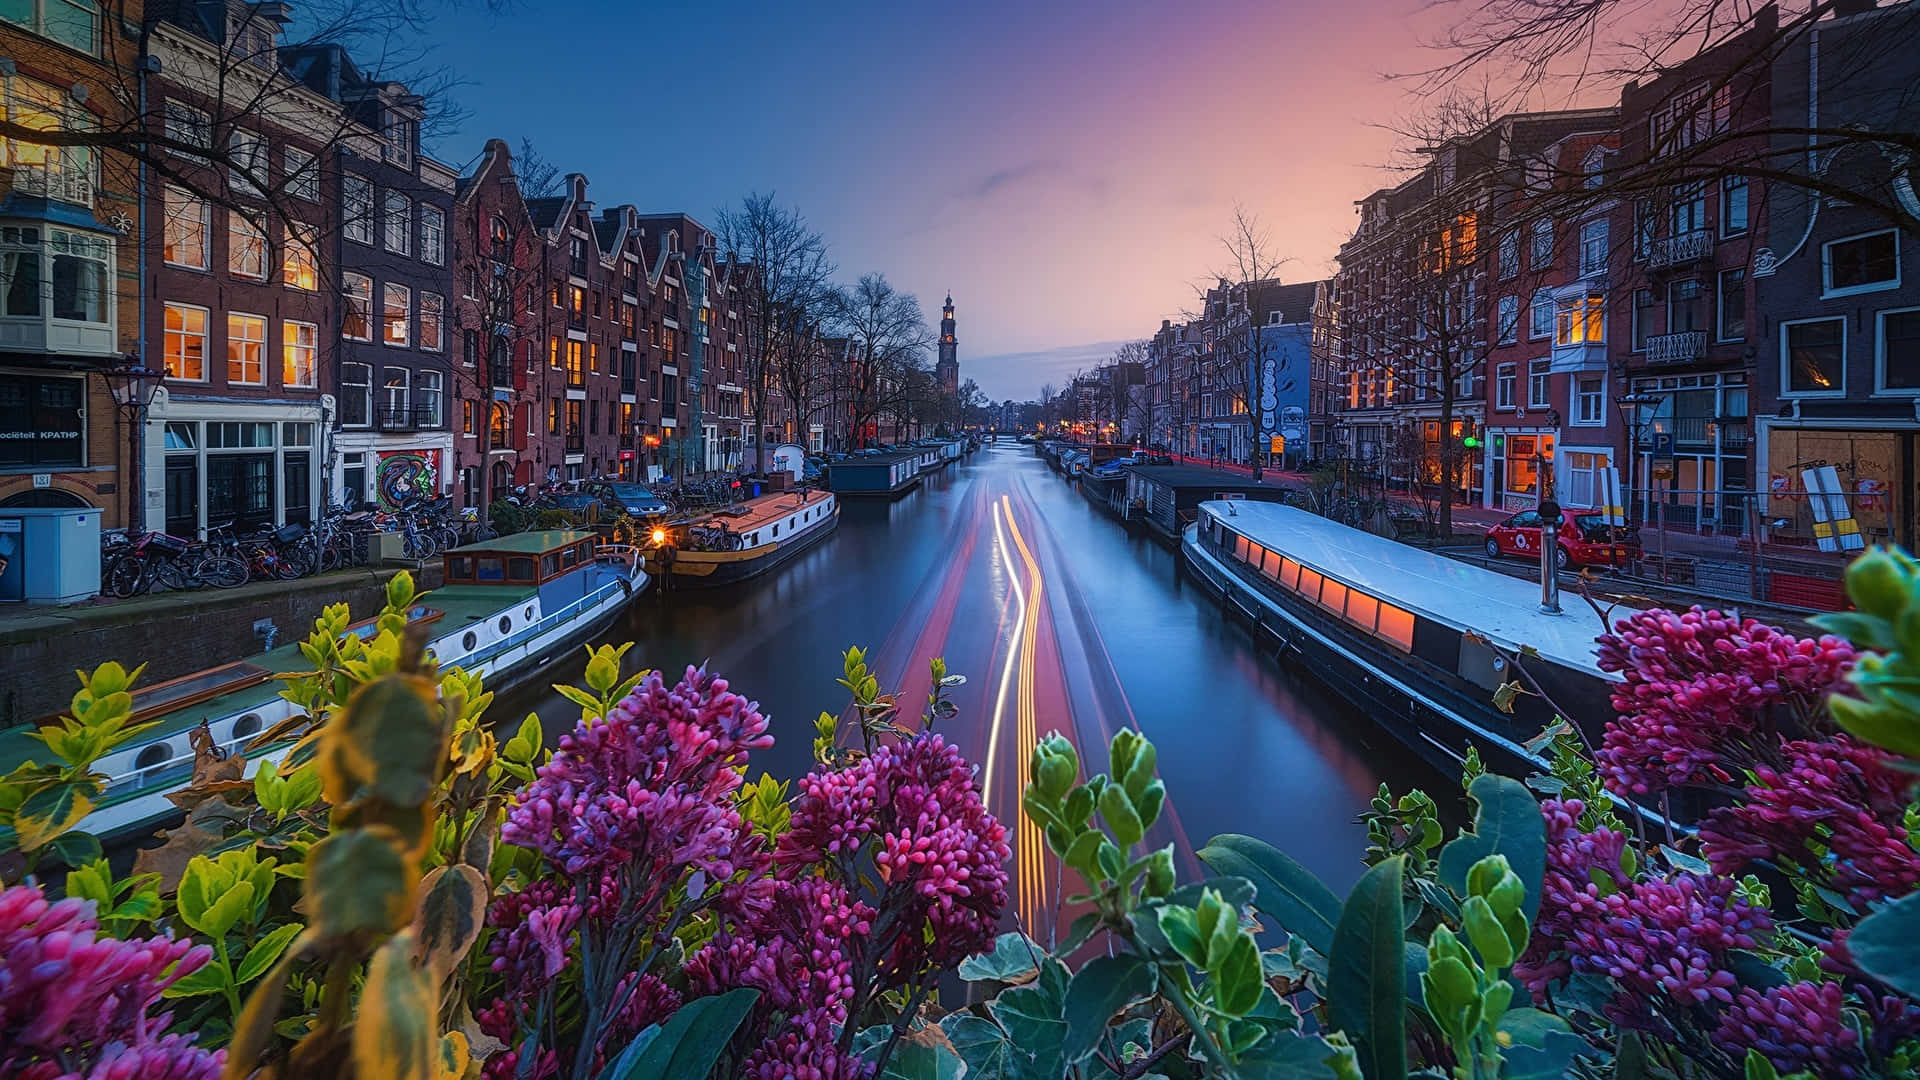 Explore the vibrant canals, cypress trees and iconic Dutch architecture in the Netherlands